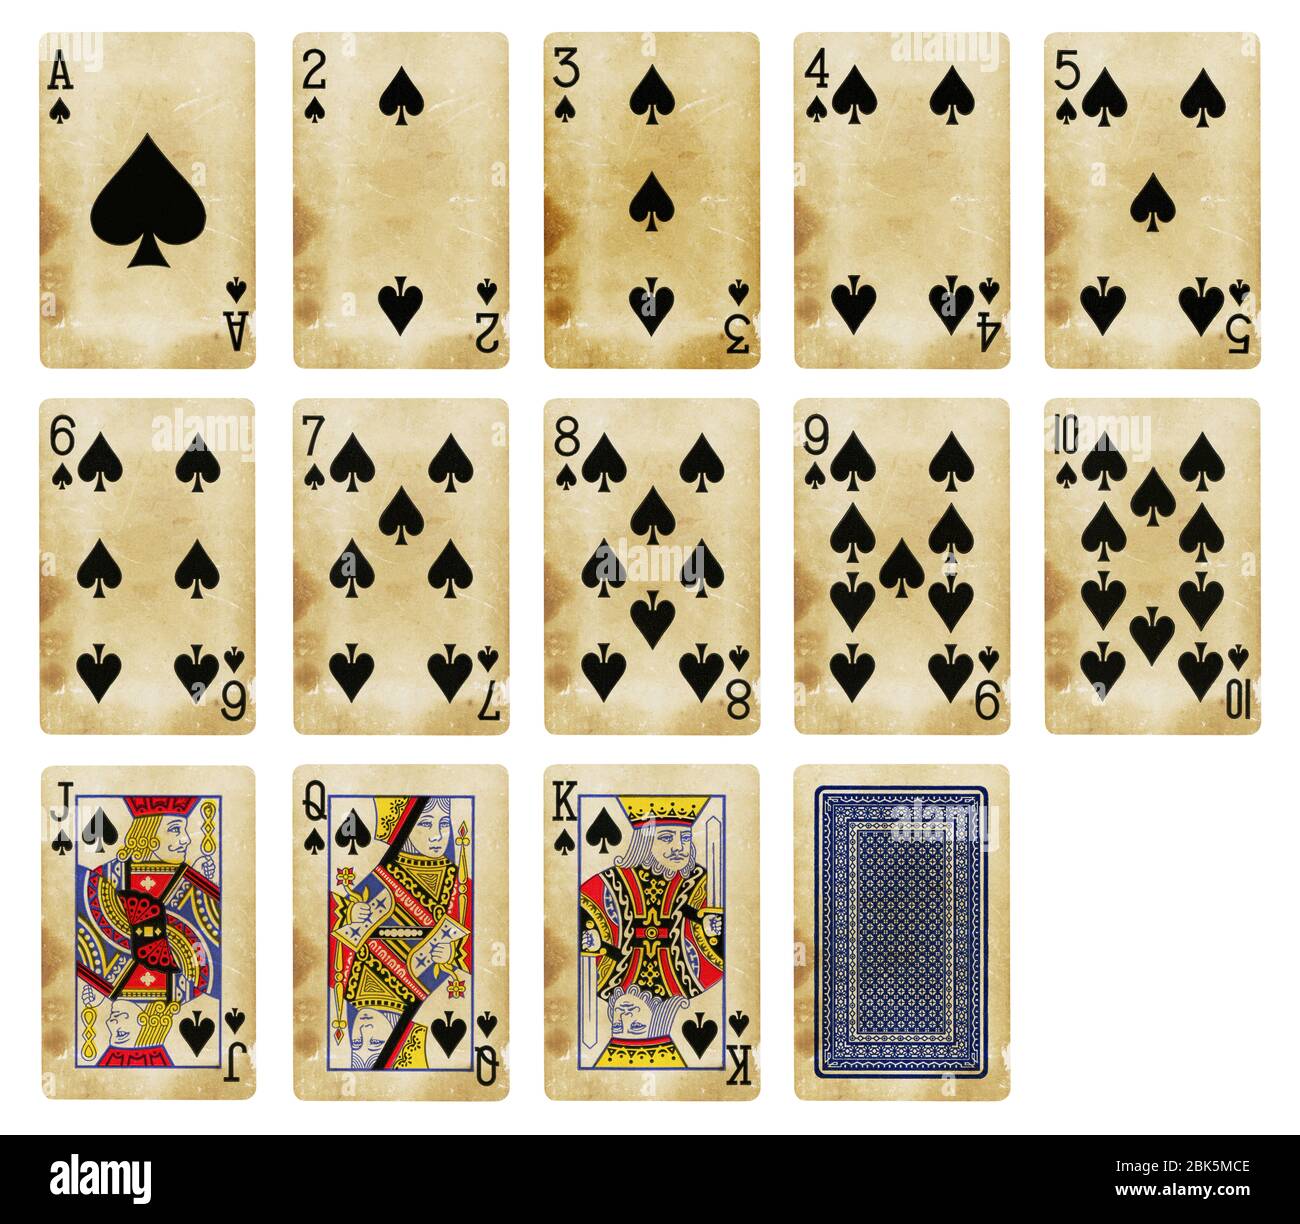 Playing cards of Spades suit, isolated on white background - High quality. Stock Photo